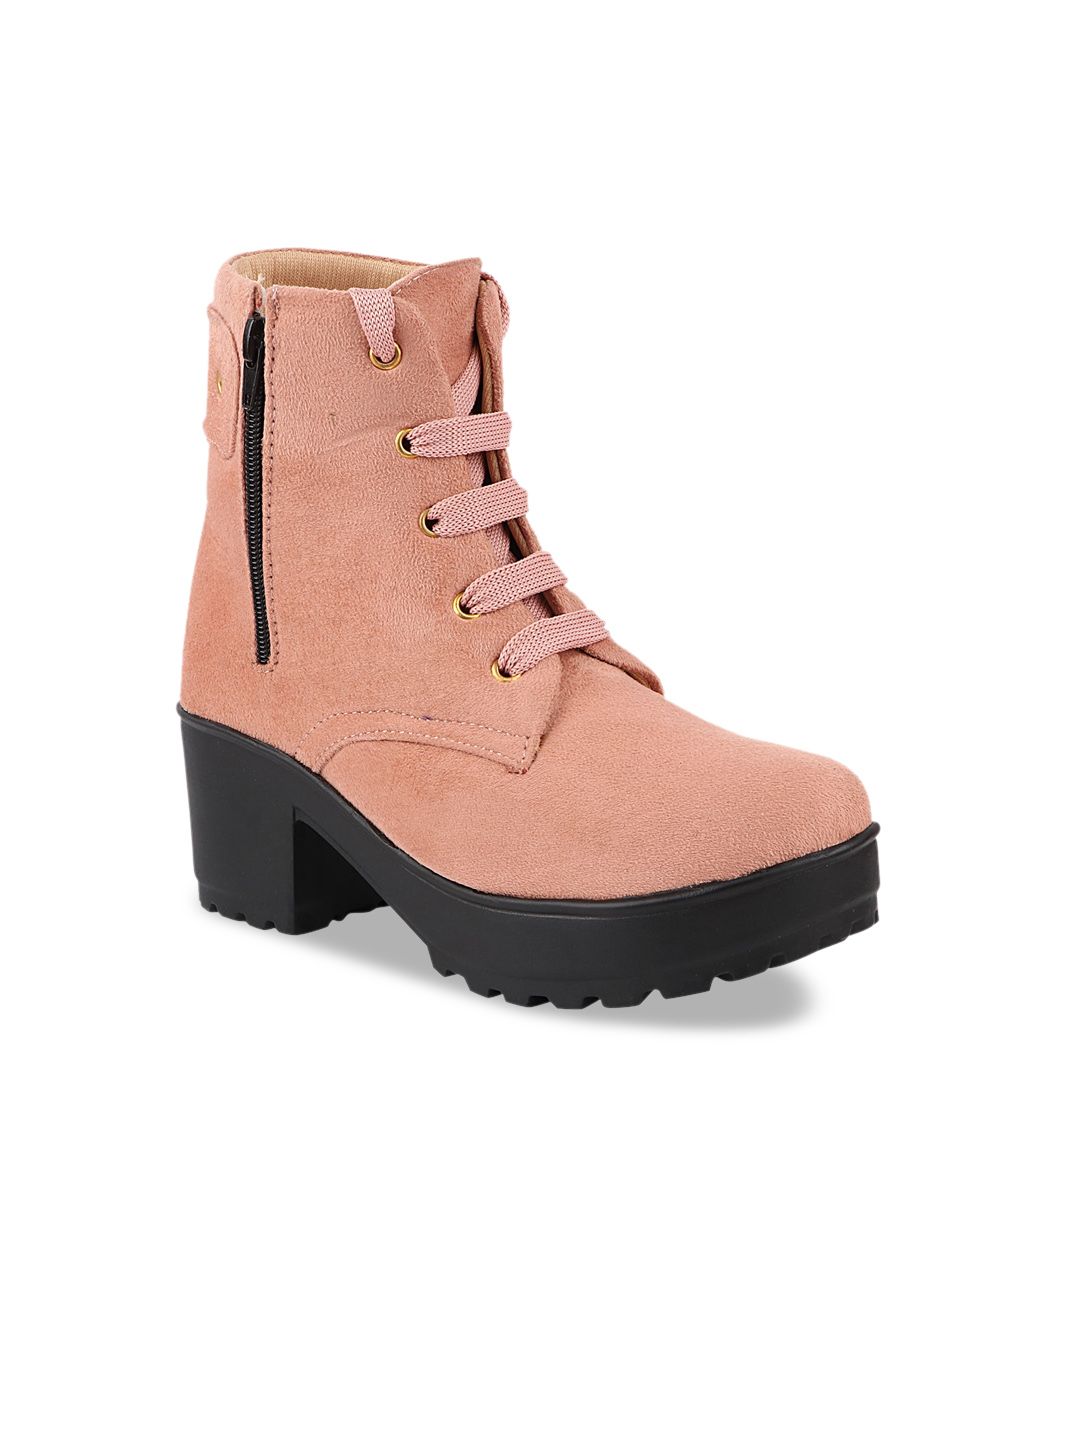 Shoetopia Peach-Coloured Suede High-Top Block Heeled Boots Price in India